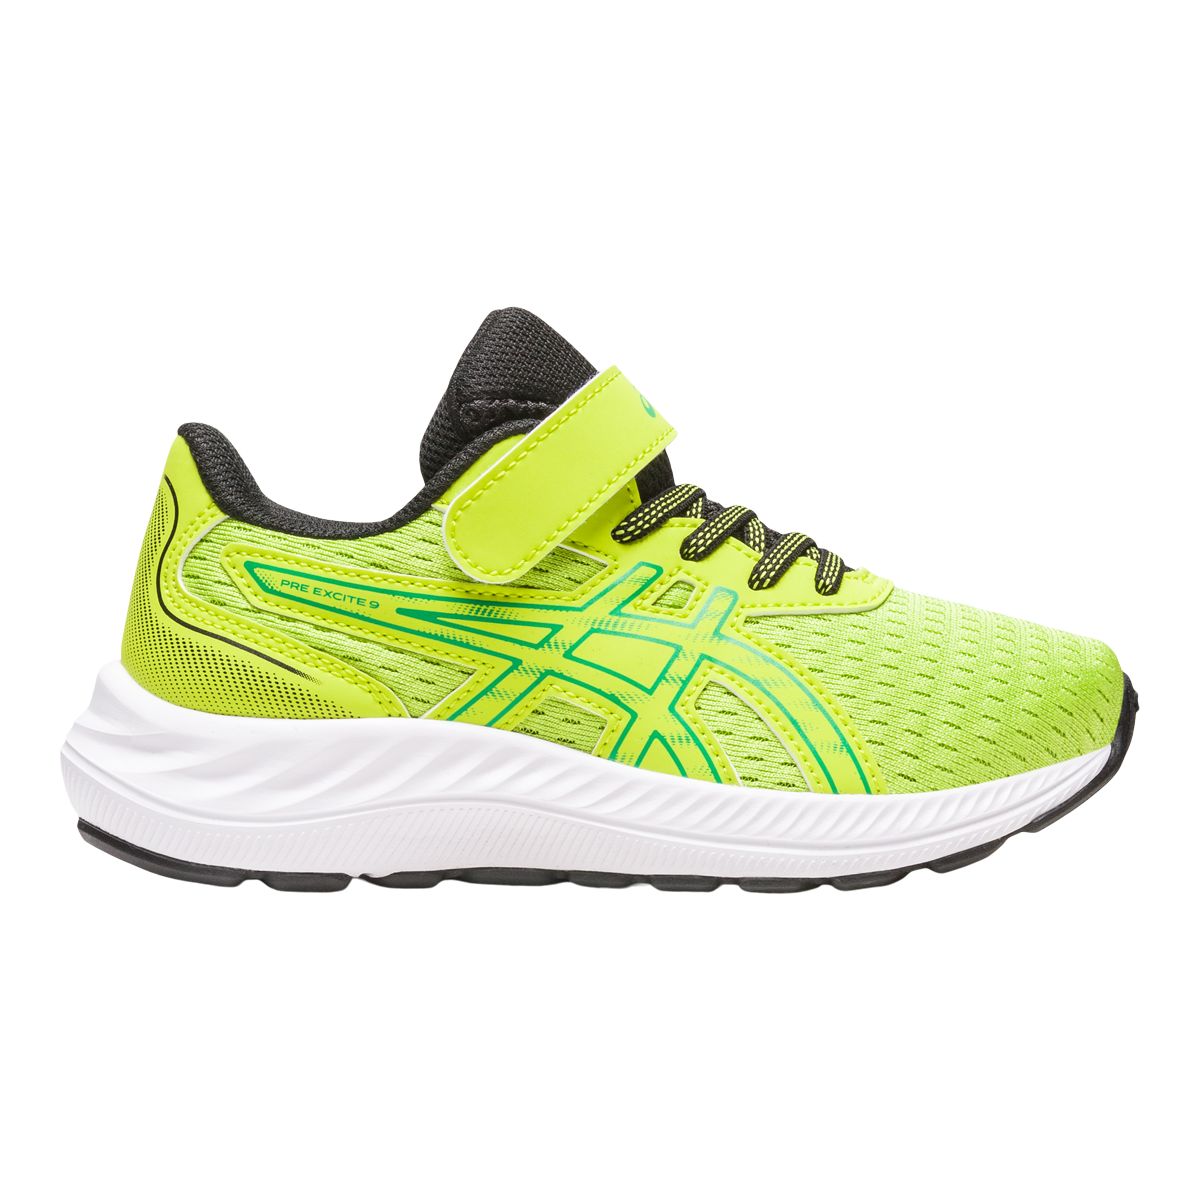 Asics Kids' Pre-School Pre Excite 9 Running Shoes